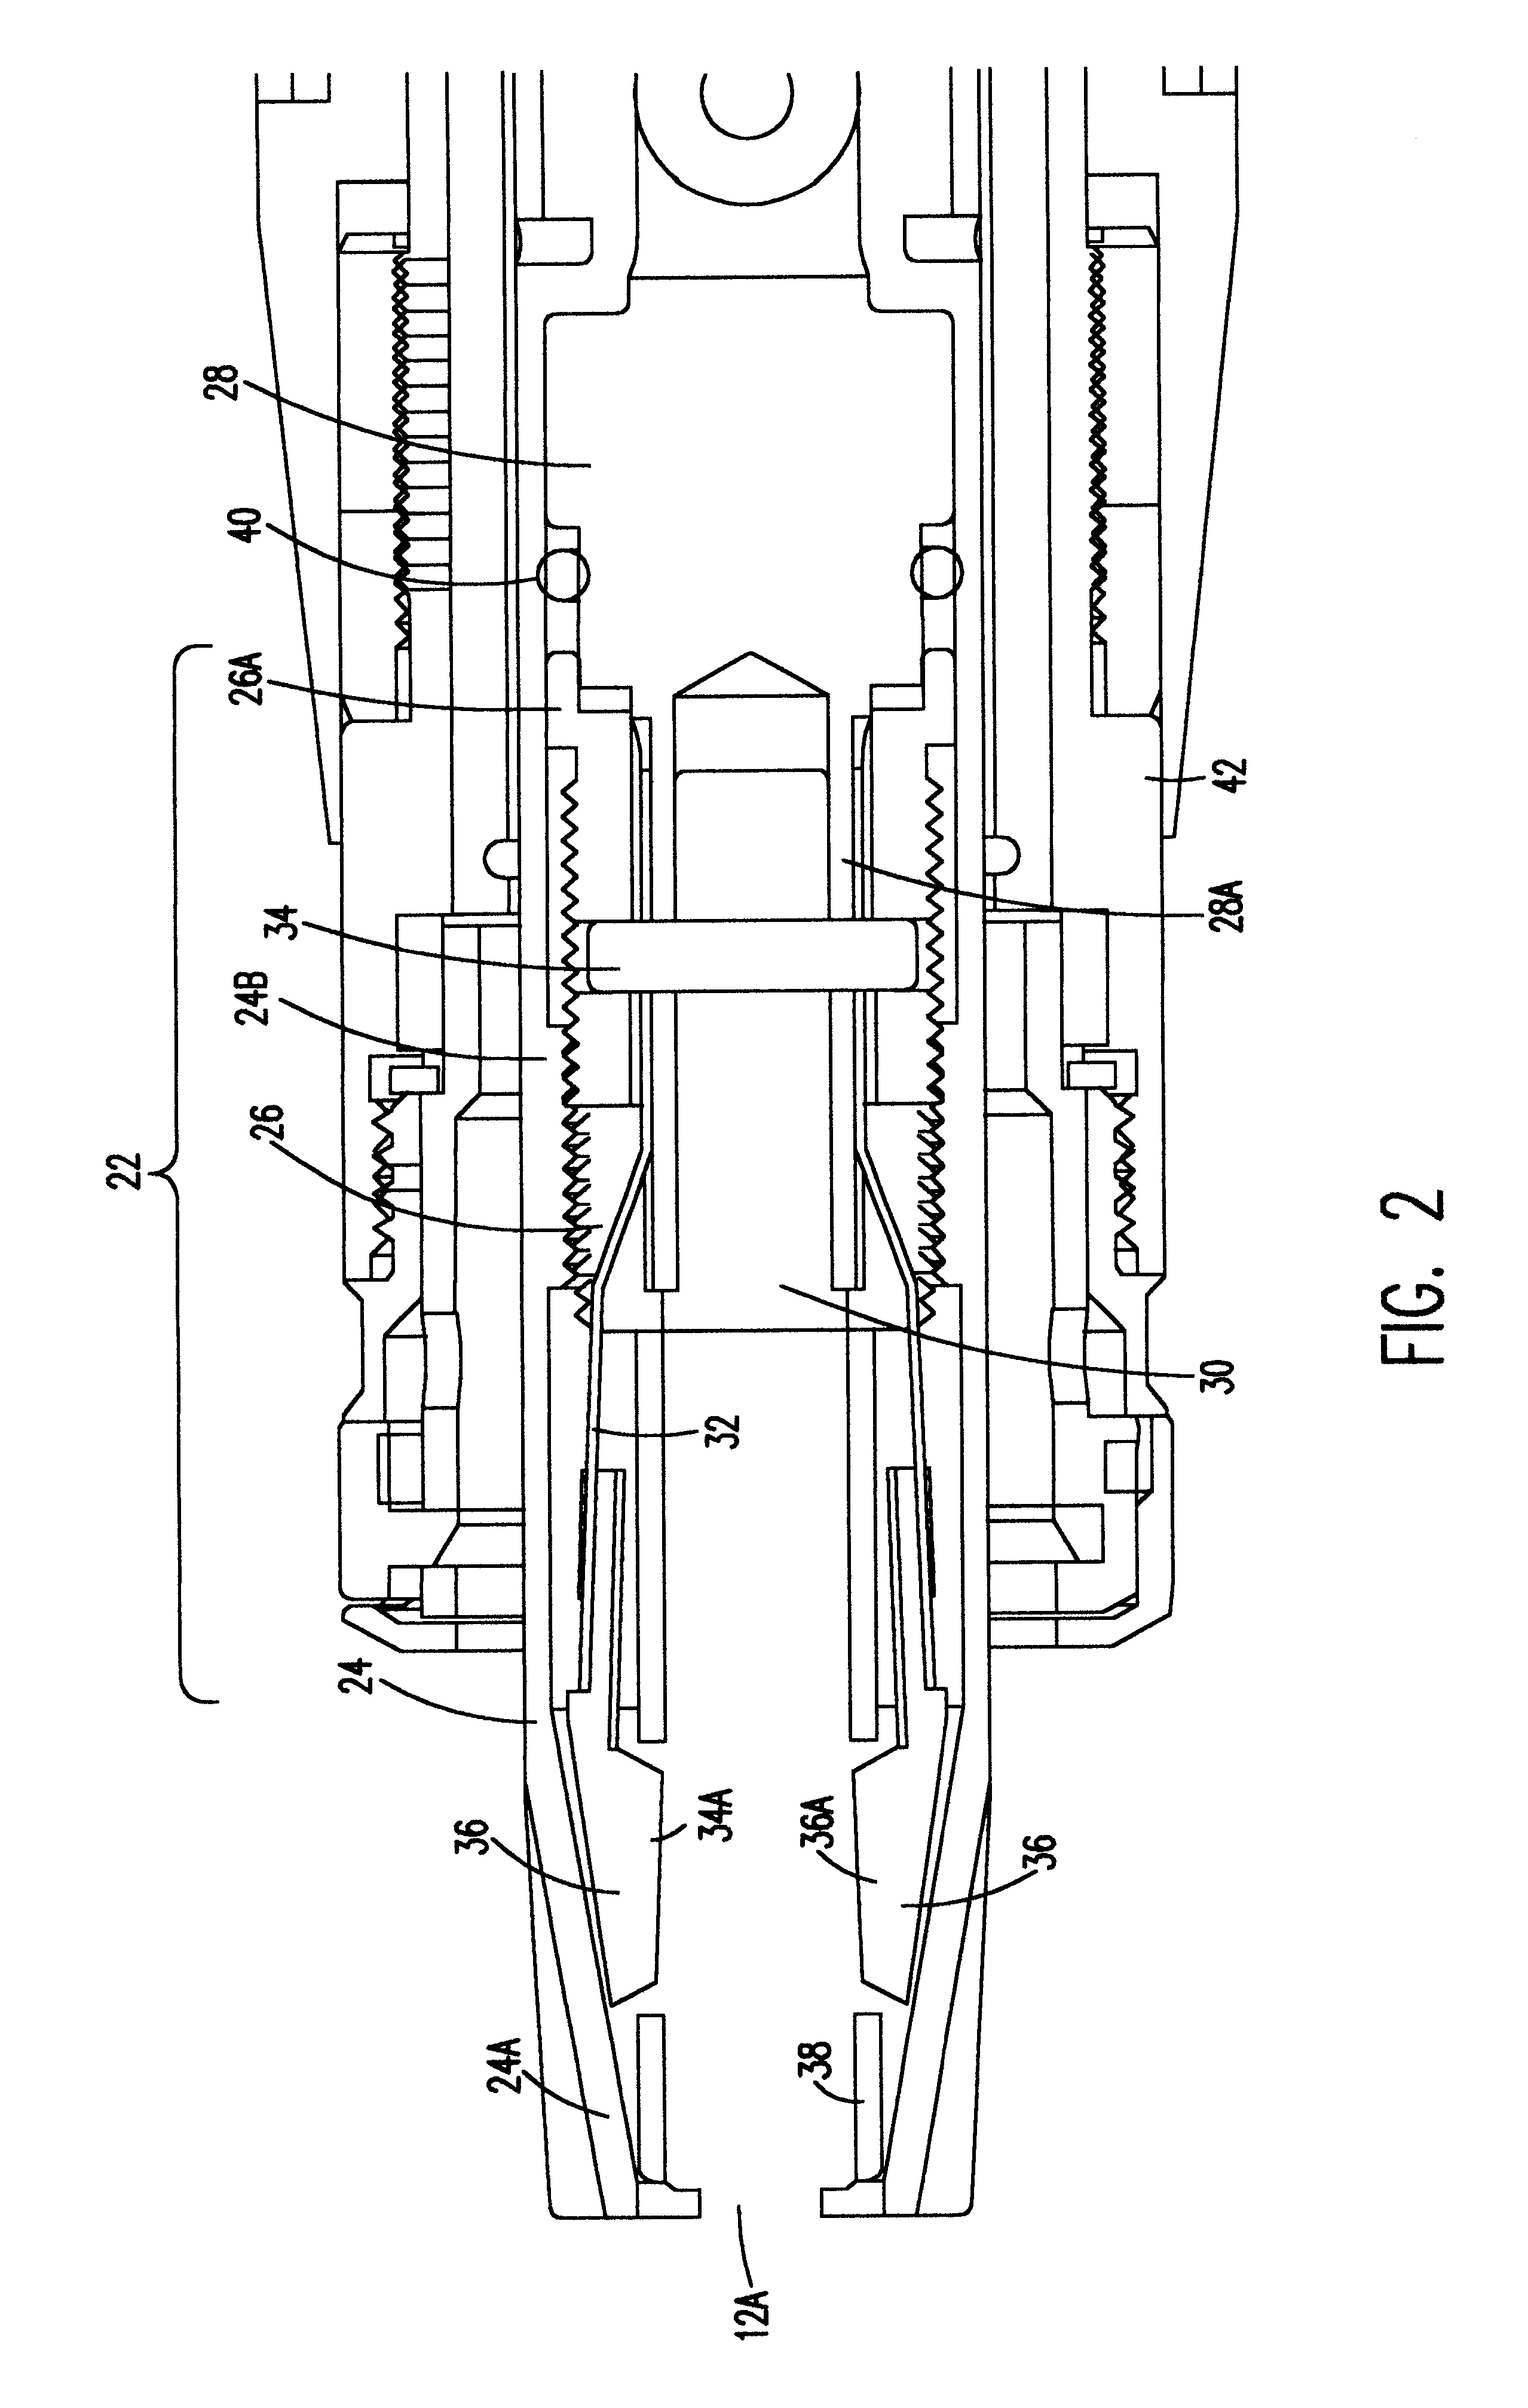 Connector assembly for a surgical saw blade